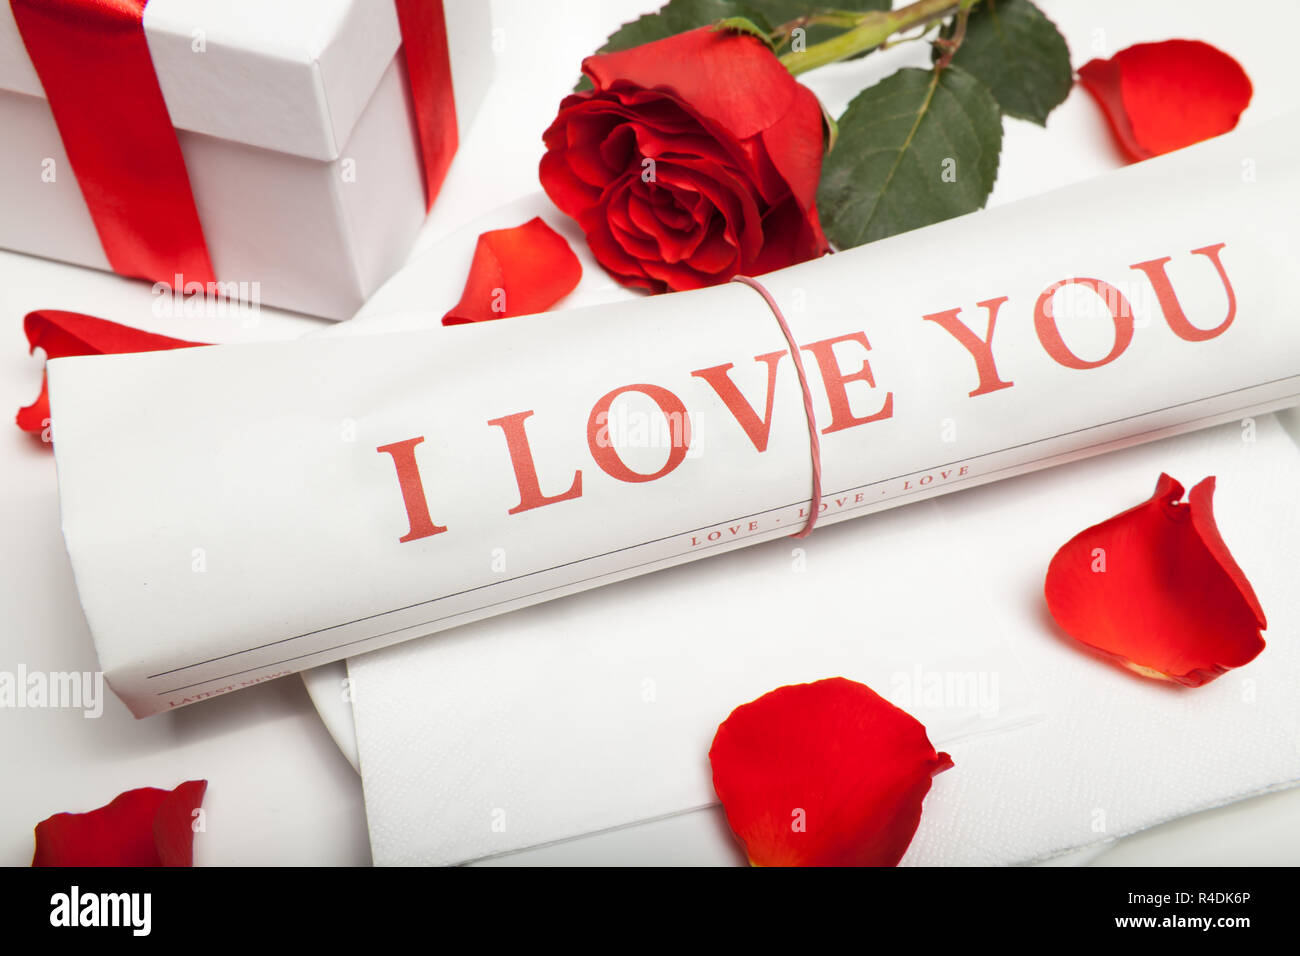 I Love You Newspaper And Red Rose Stock Photo Alamy